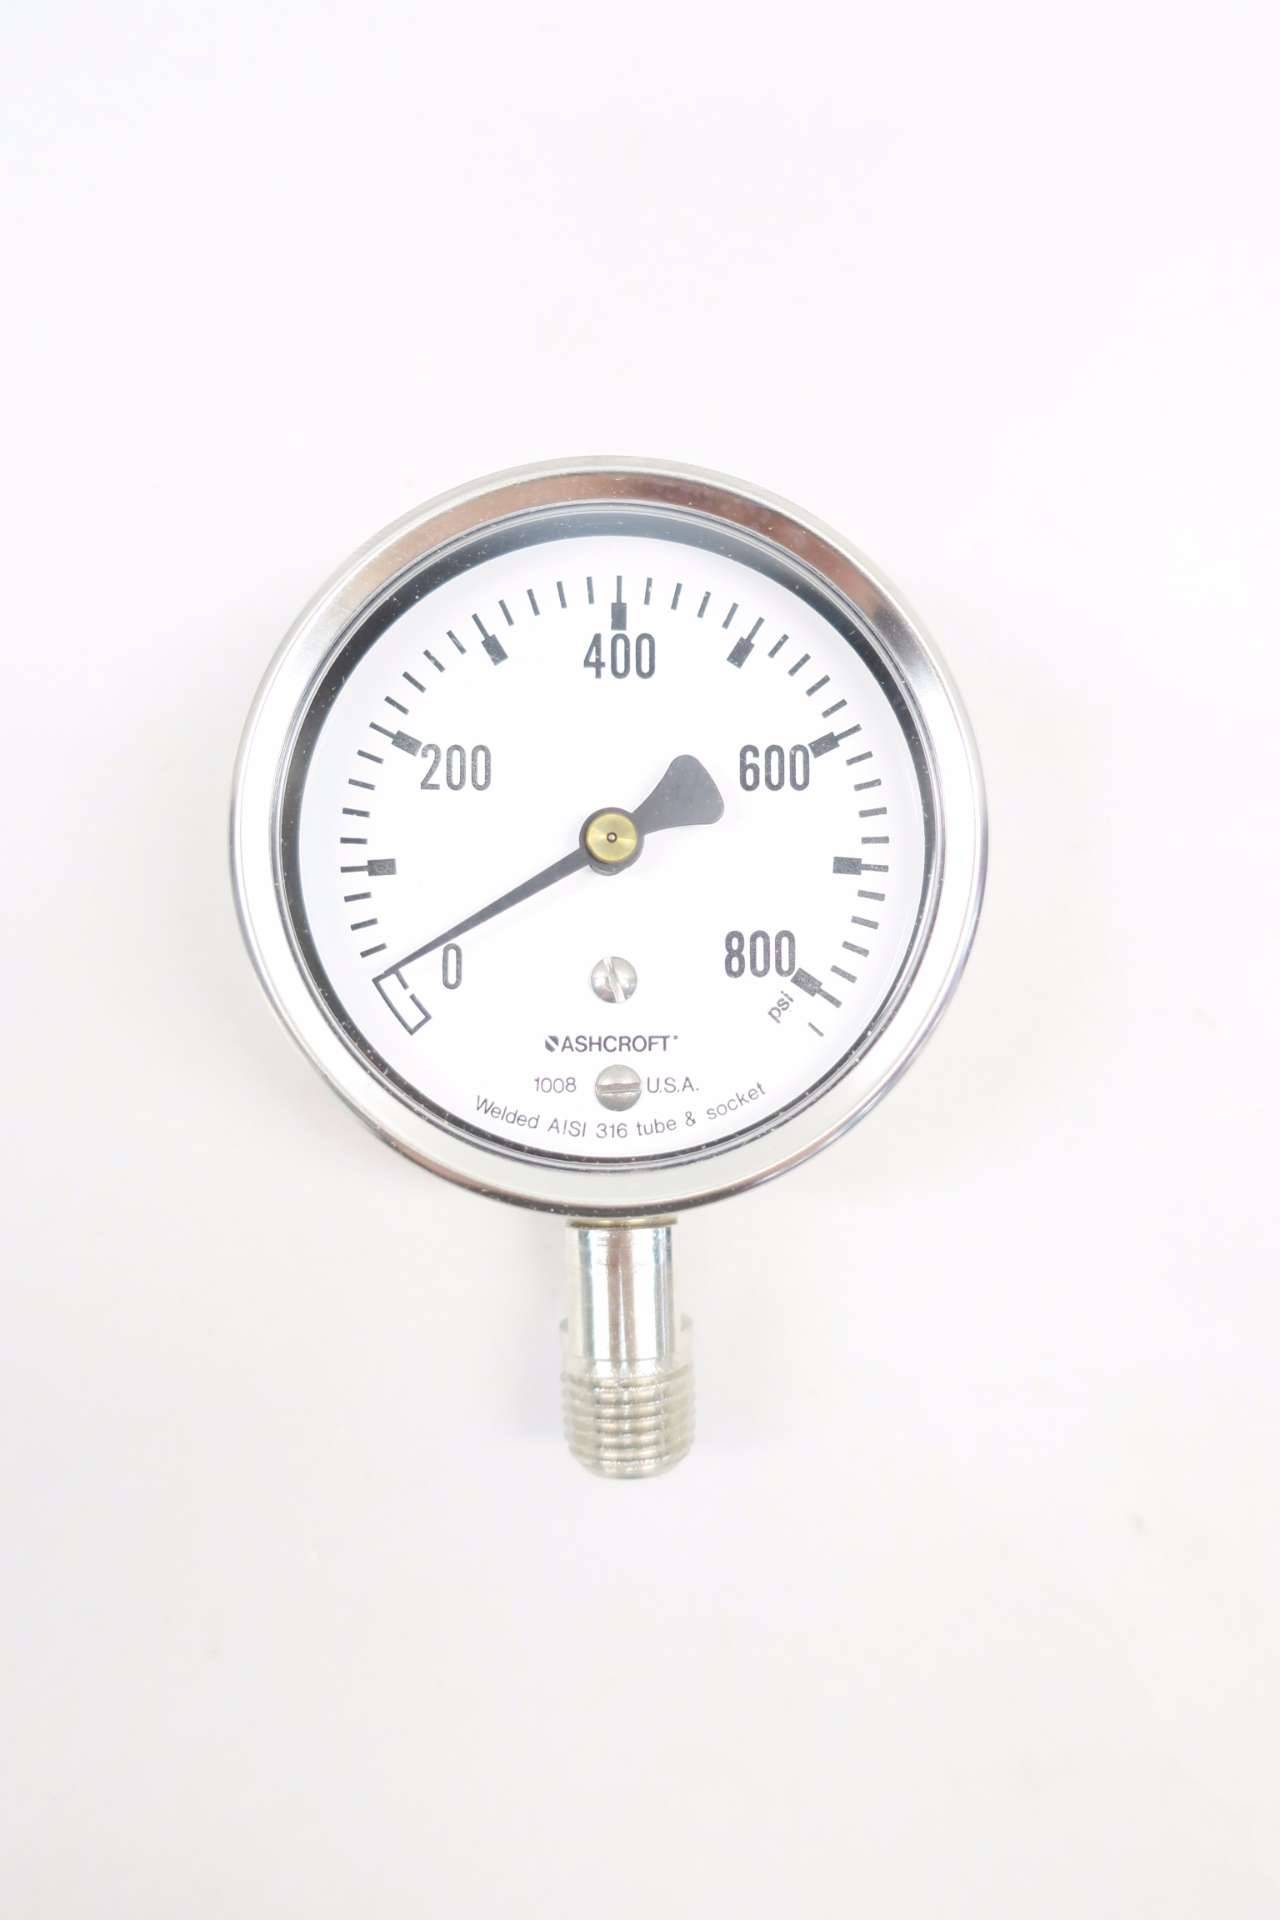 ASHCROFT 63-1008-S-02L-800 STAINLESS STEEL GAUGE 0-800 PSI 2-3/4" DIA 3